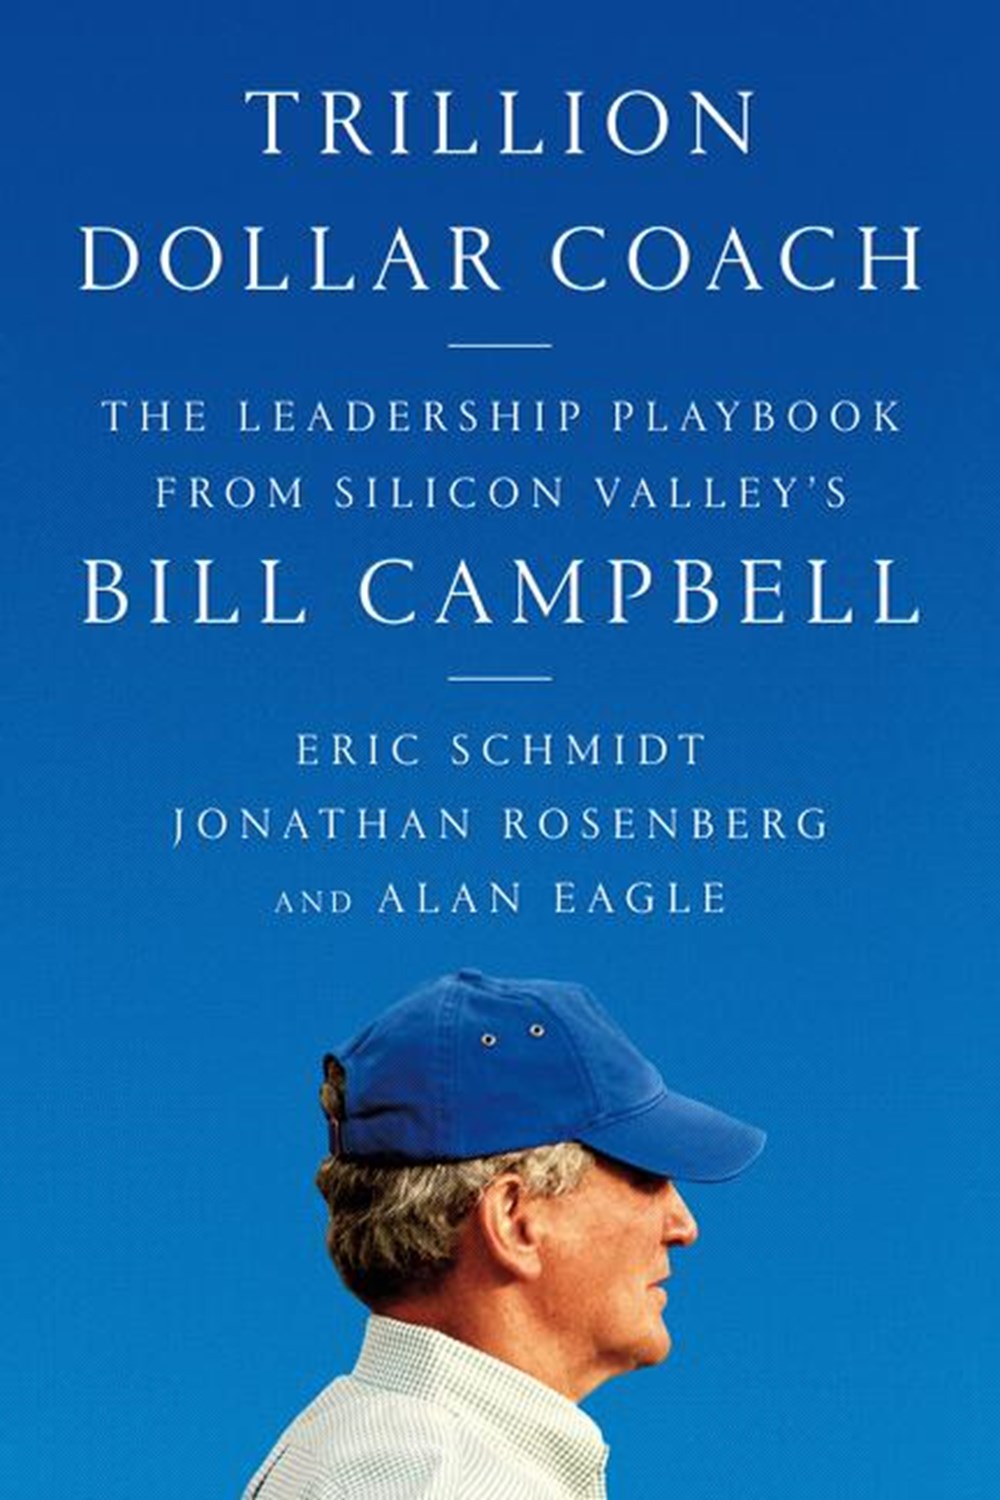 Trillion Dollar Coach: The Leadership Playbook of Silicon Valley's Bill Campbell Hardcover